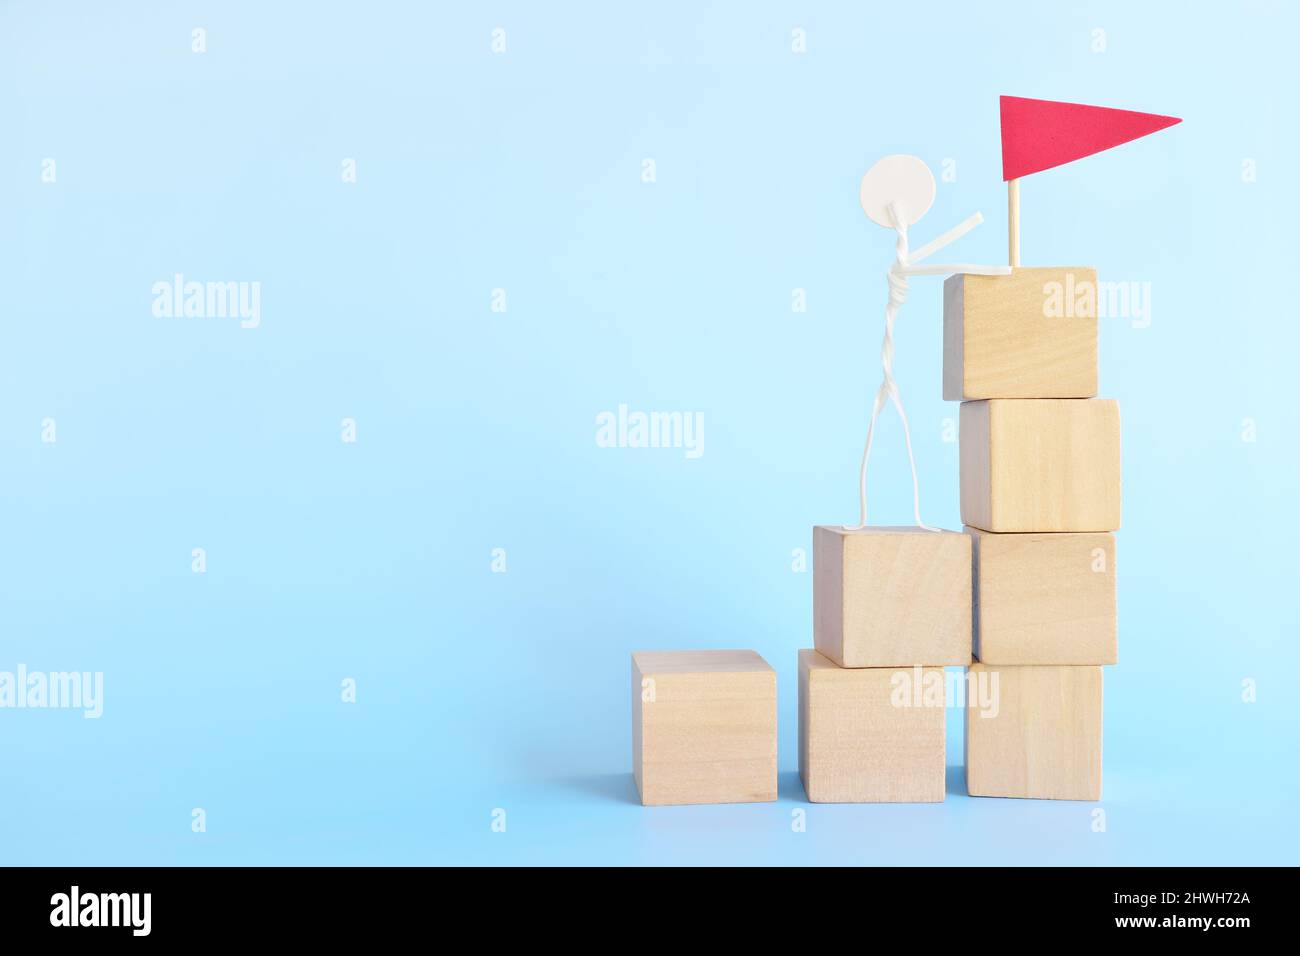 Ladder to success concept. Stick man climbing stairs with a red flag. Stock Photo